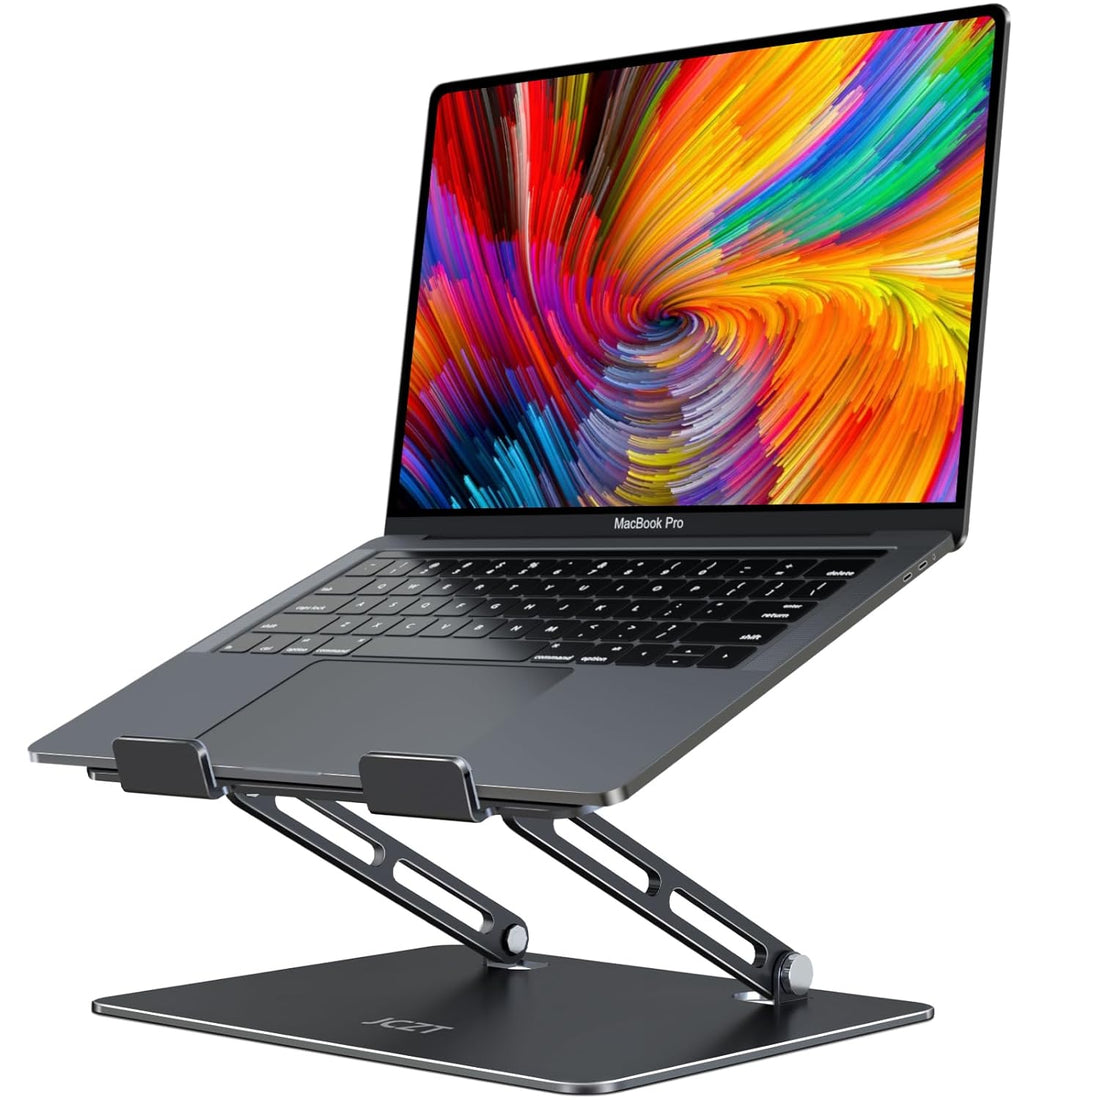 JCZT Adjustable Laptop Stand for Desk, Portable Laptop Riser, Aluminum Laptop Stand Foldable, Ergonomic Computer Notebook Stand Holder for MacBook Air Pro, Dell, HP 10-16'', Black